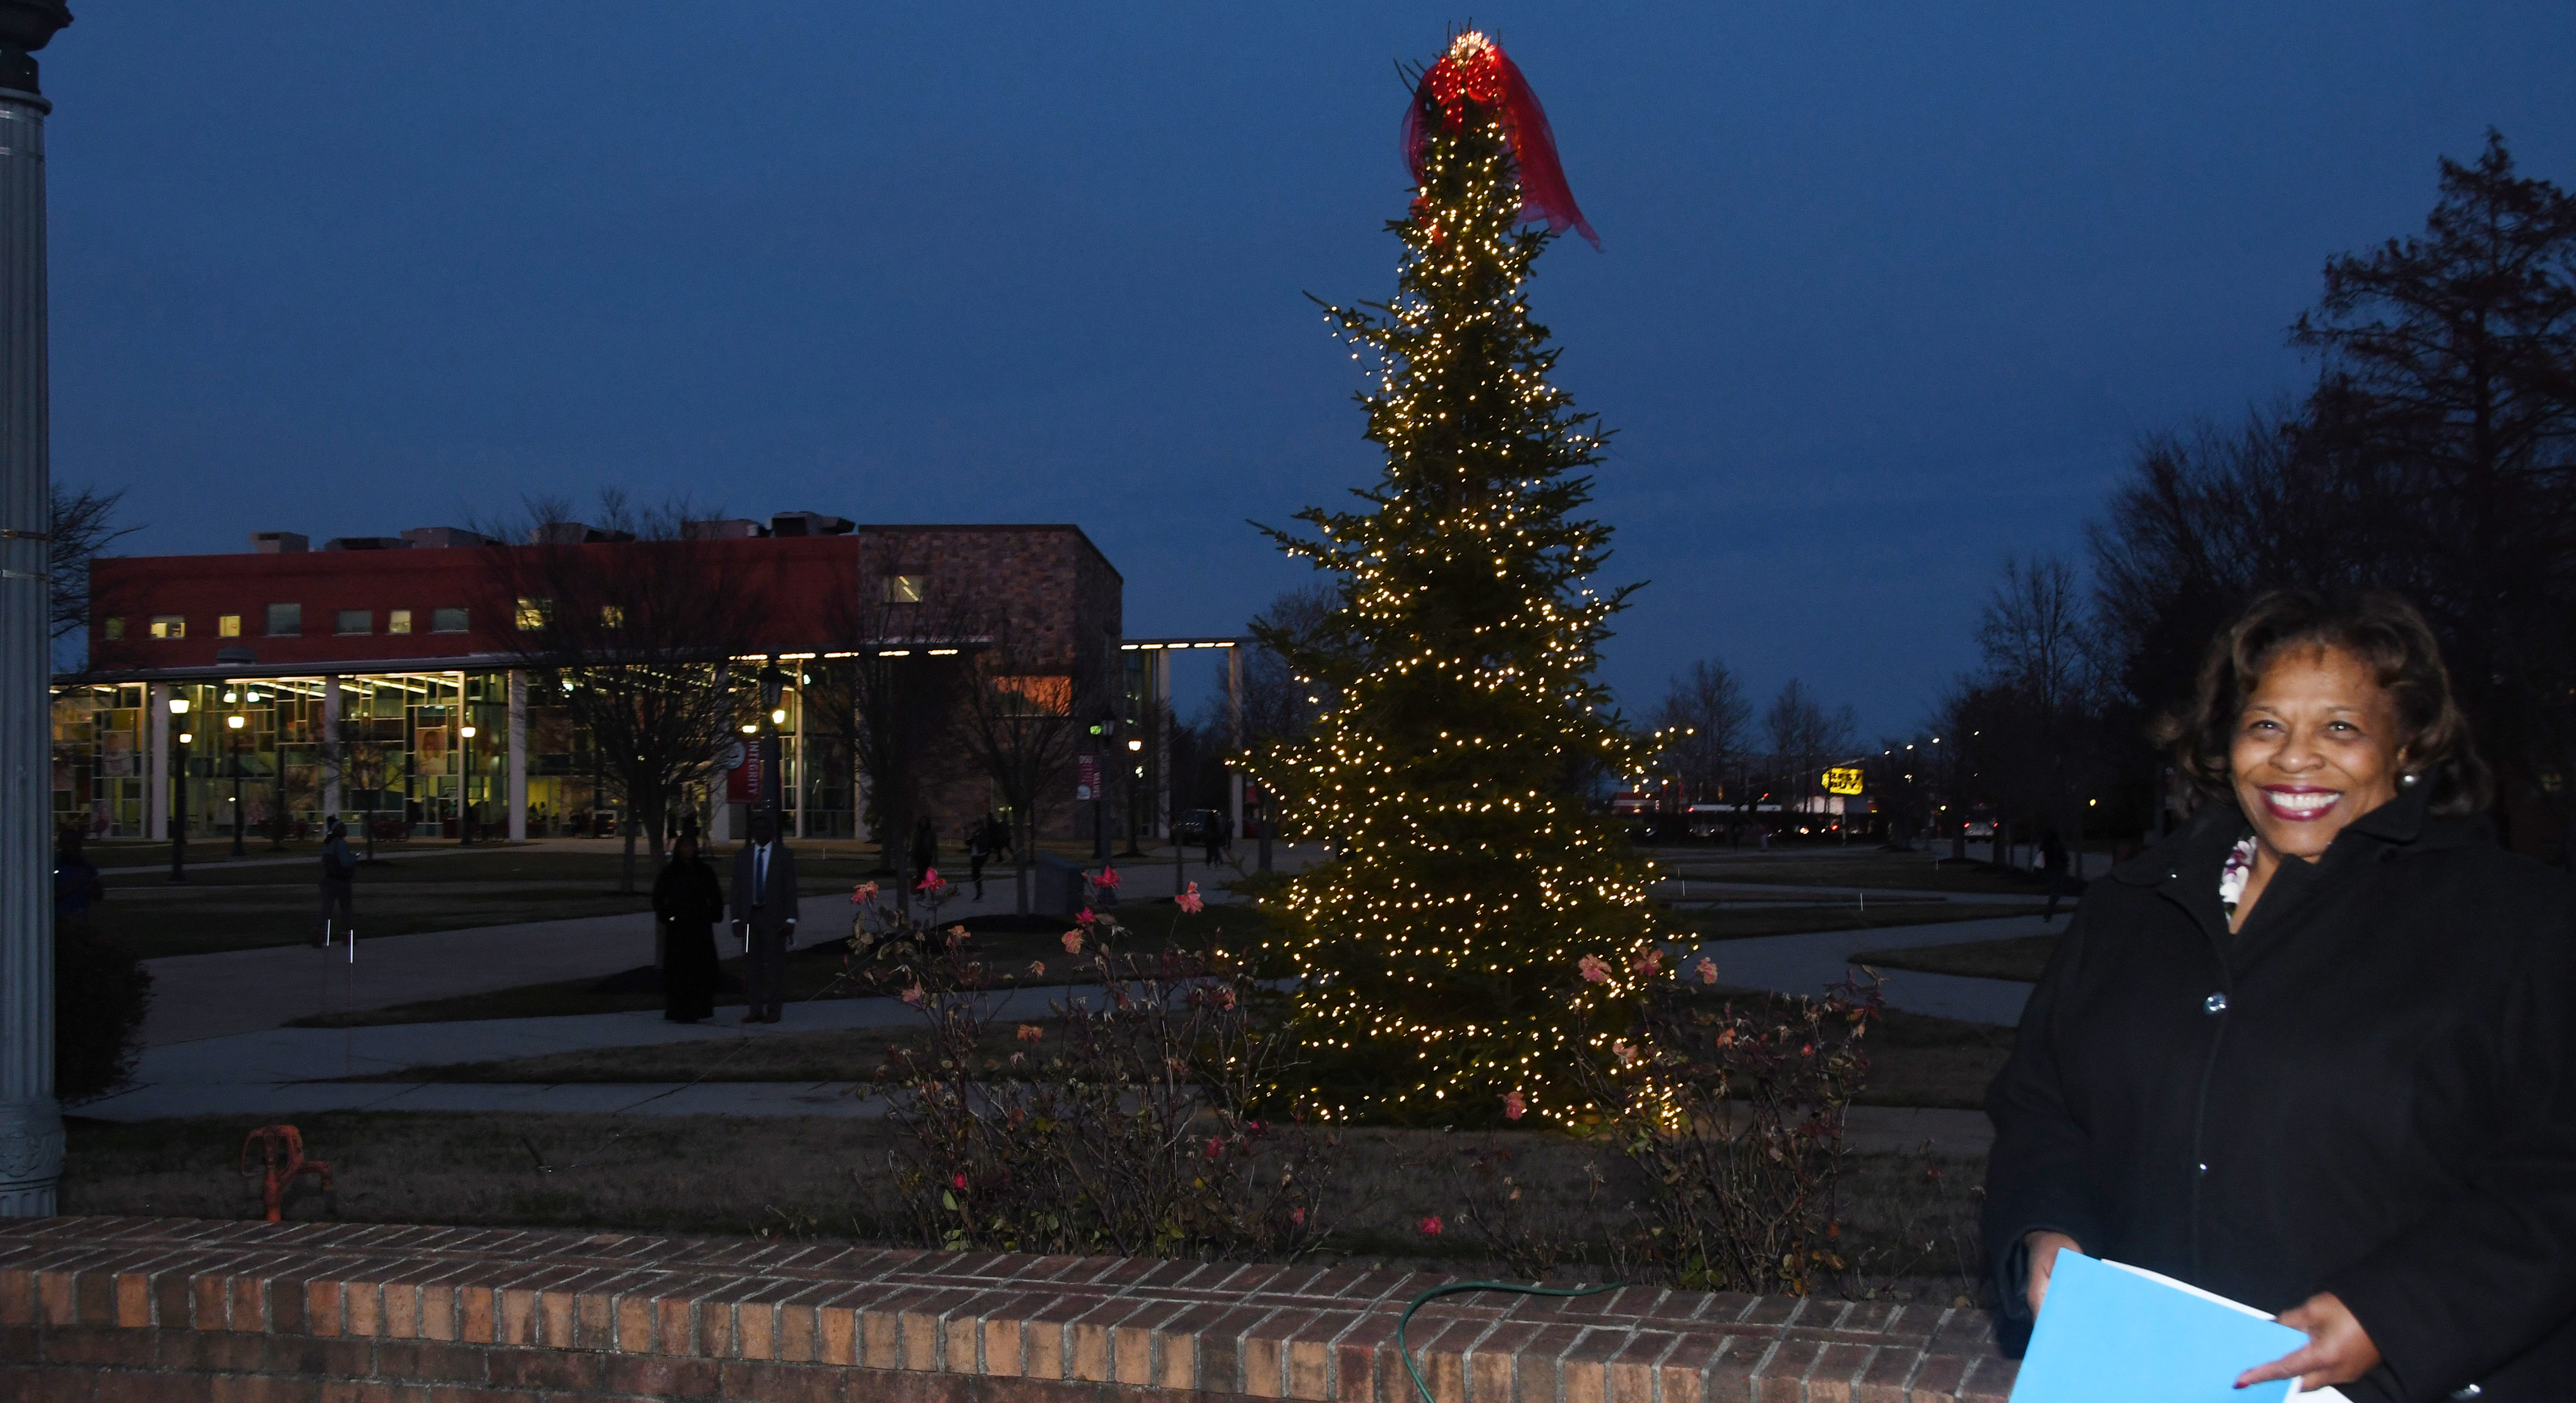 University President Wilma Mishoe stands in from the campus Christmas tree, which she had just lit in a Dec. 3 ceremony outside of the Recreation and Wellness Center.